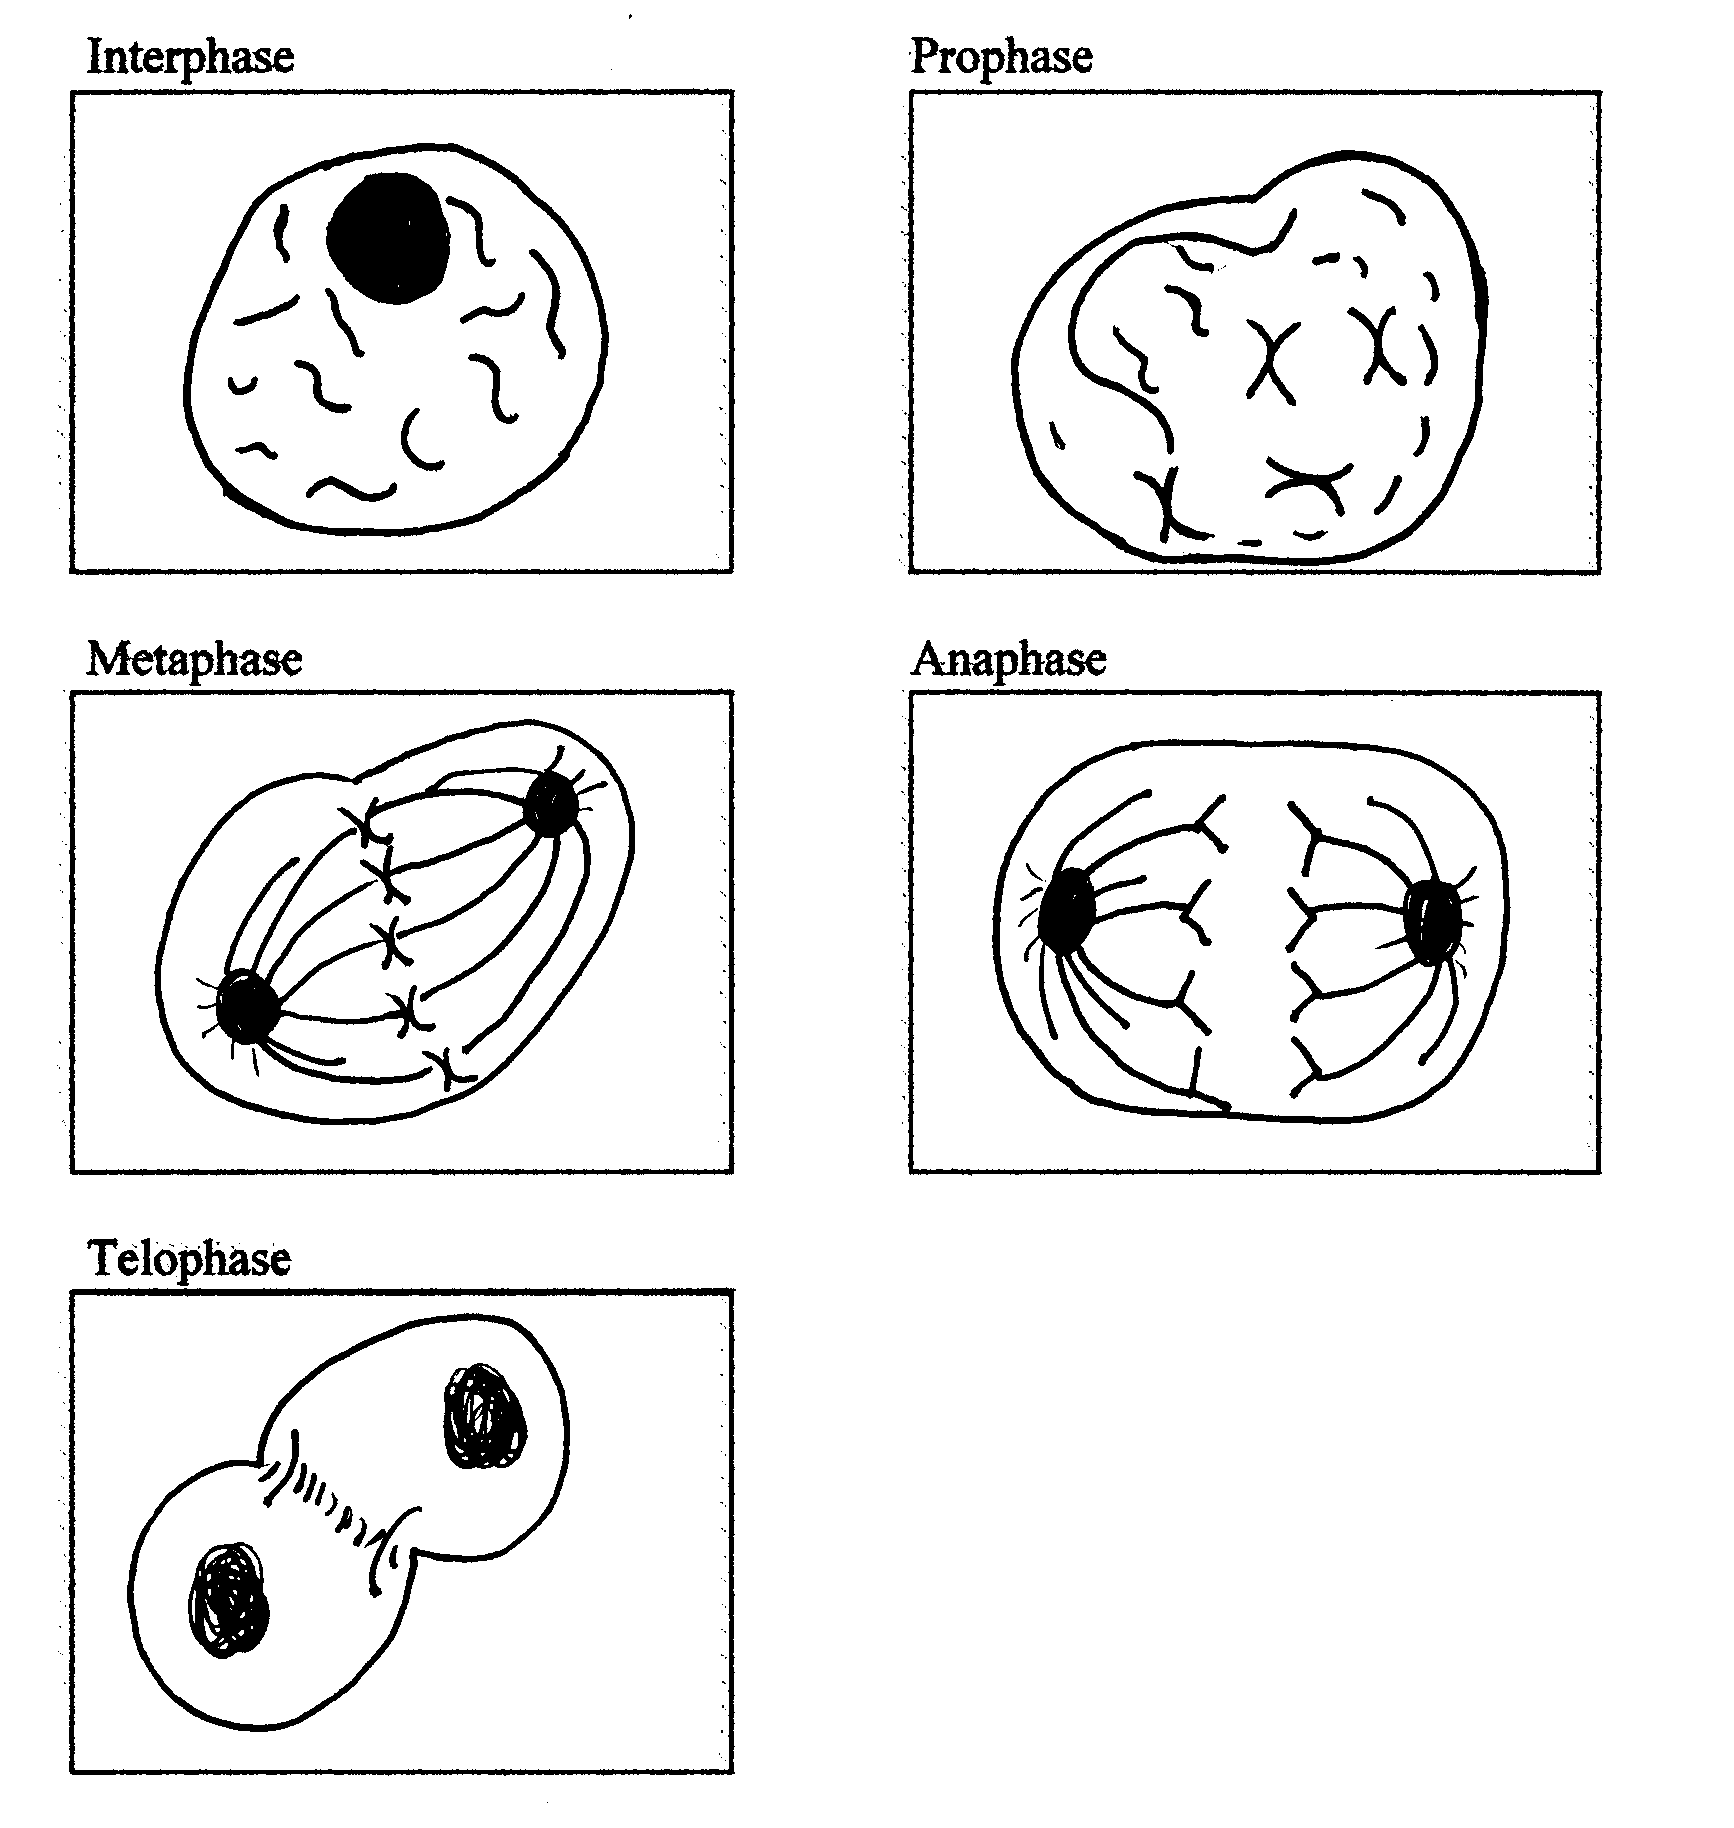 mitosis stages under microscope